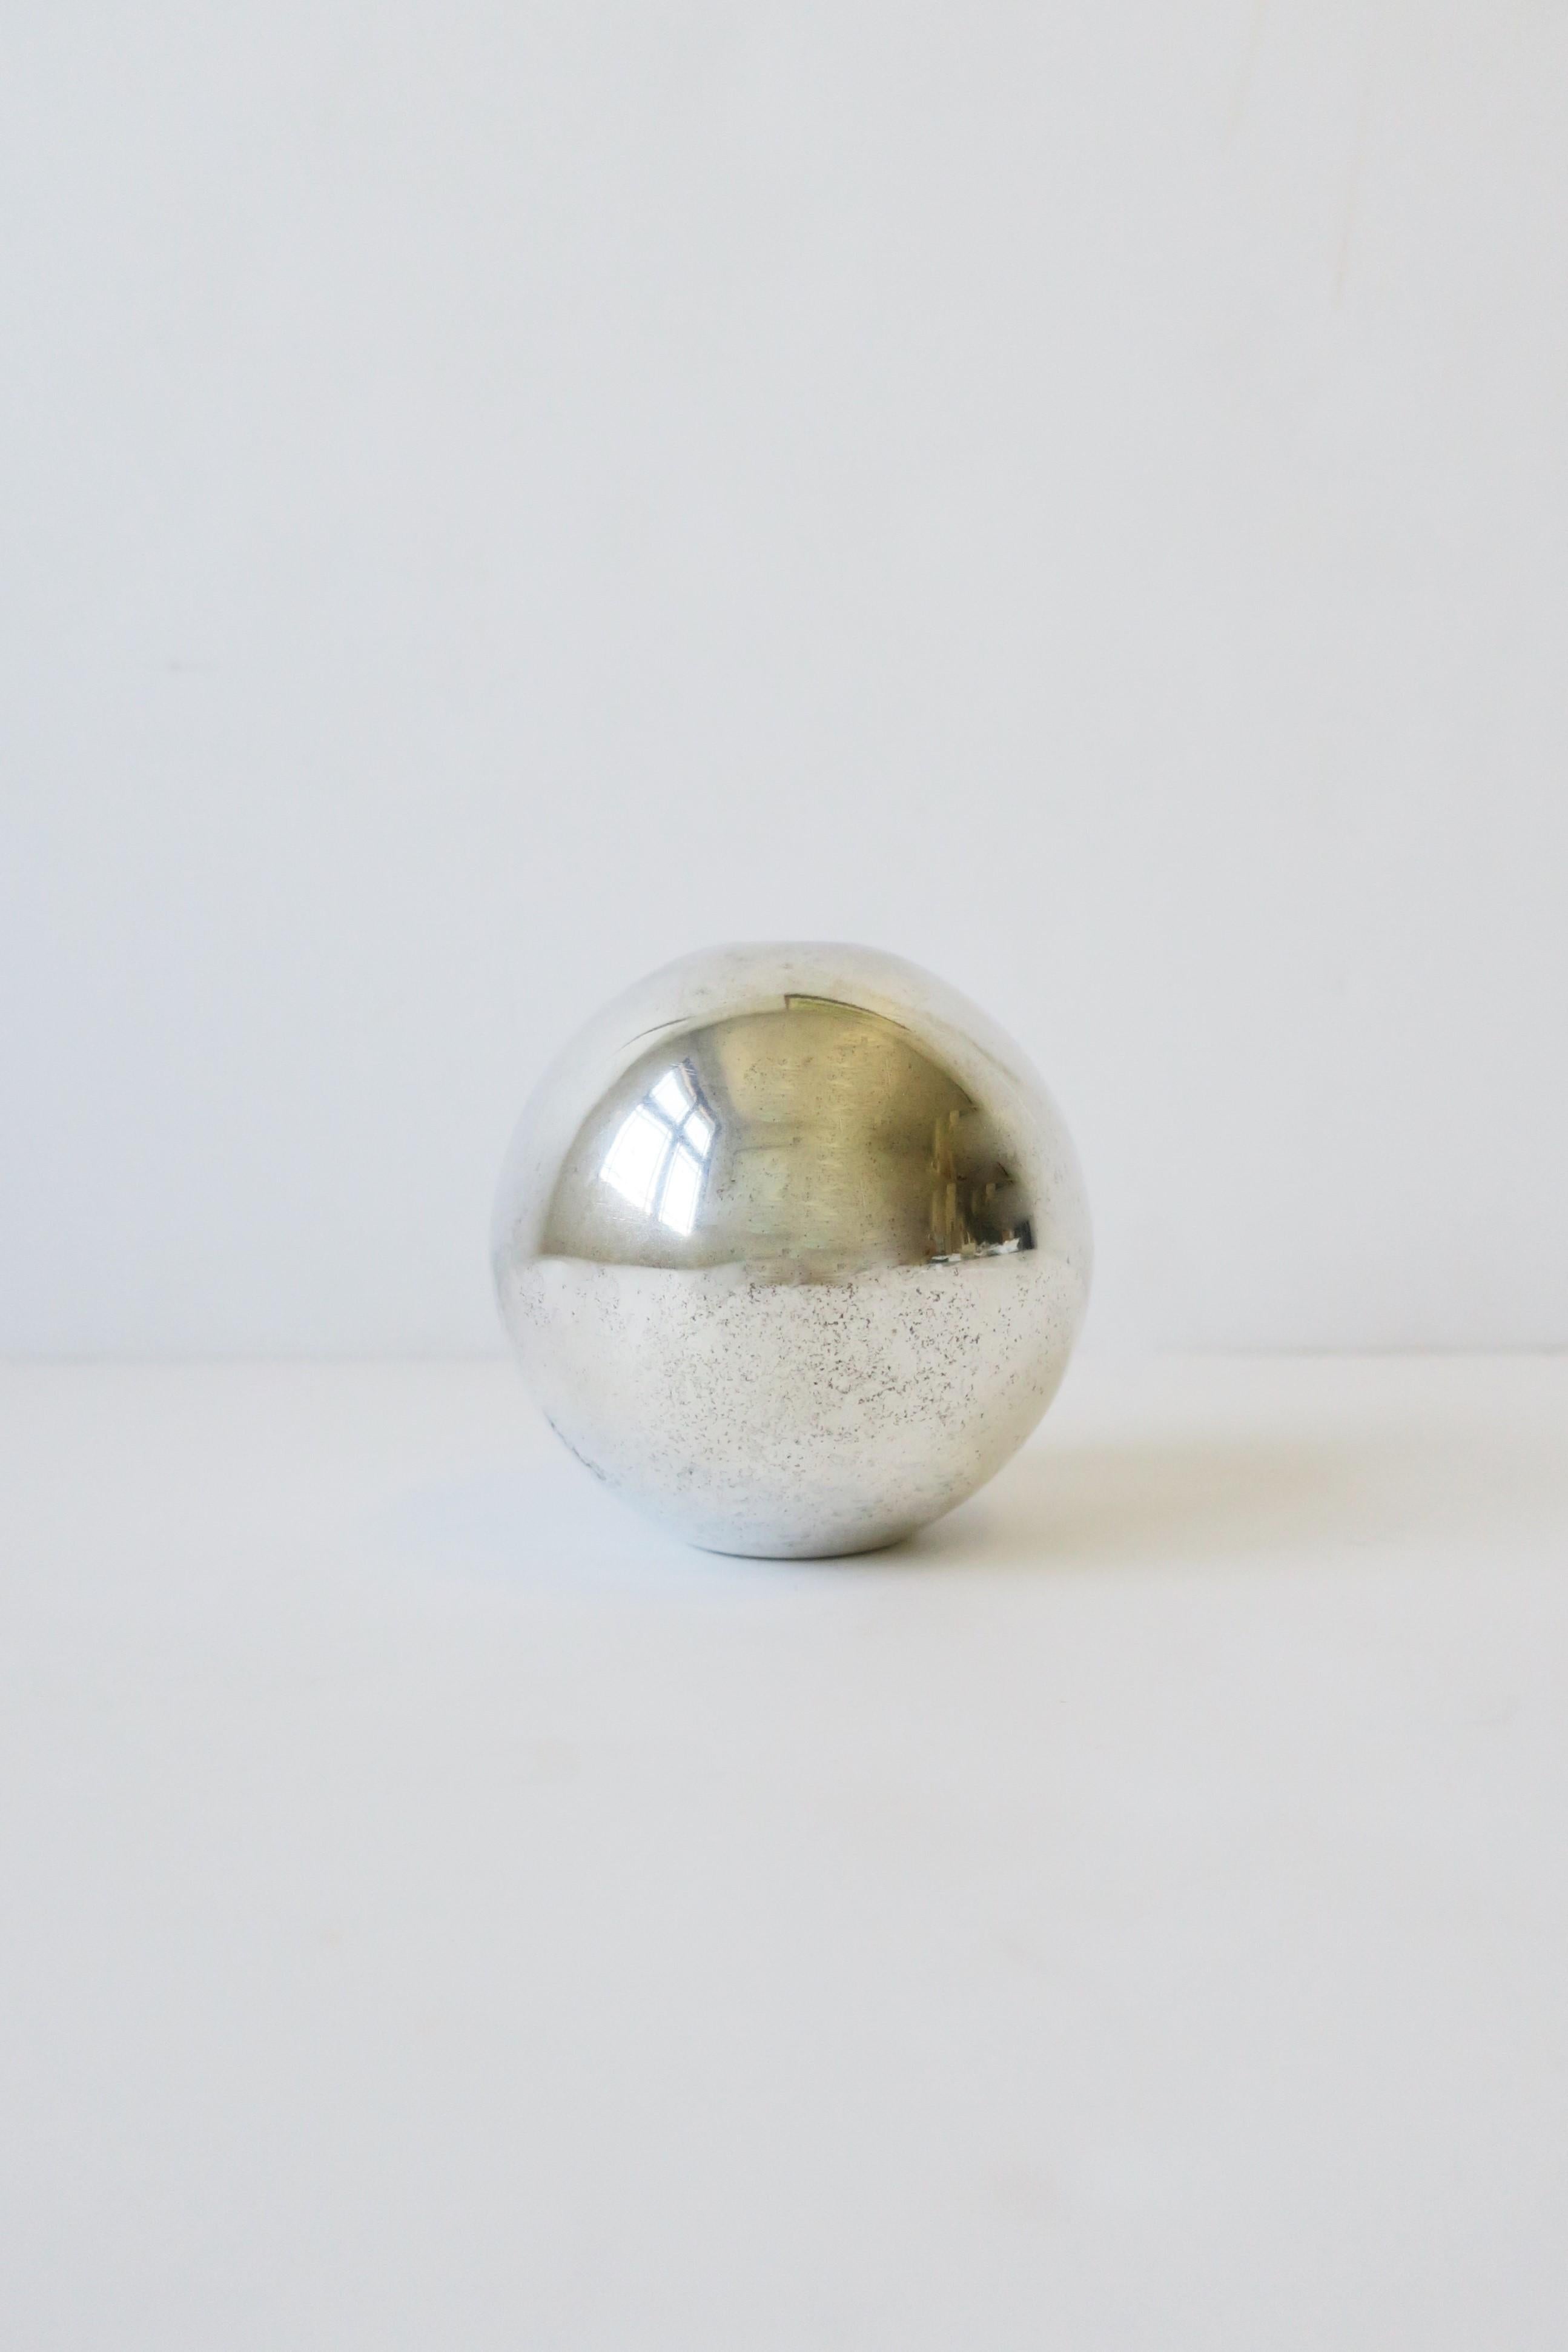 A rare, Robert Isabell 'Hole-in-One' bud vase for Swid Powell Co.
A very beautiful, rare, and substantial Postmodern period sterling silver plate over brass 'Hole-in-One' vase by American designer Robert Isabell for Swid Powell Co., circa 1980s.